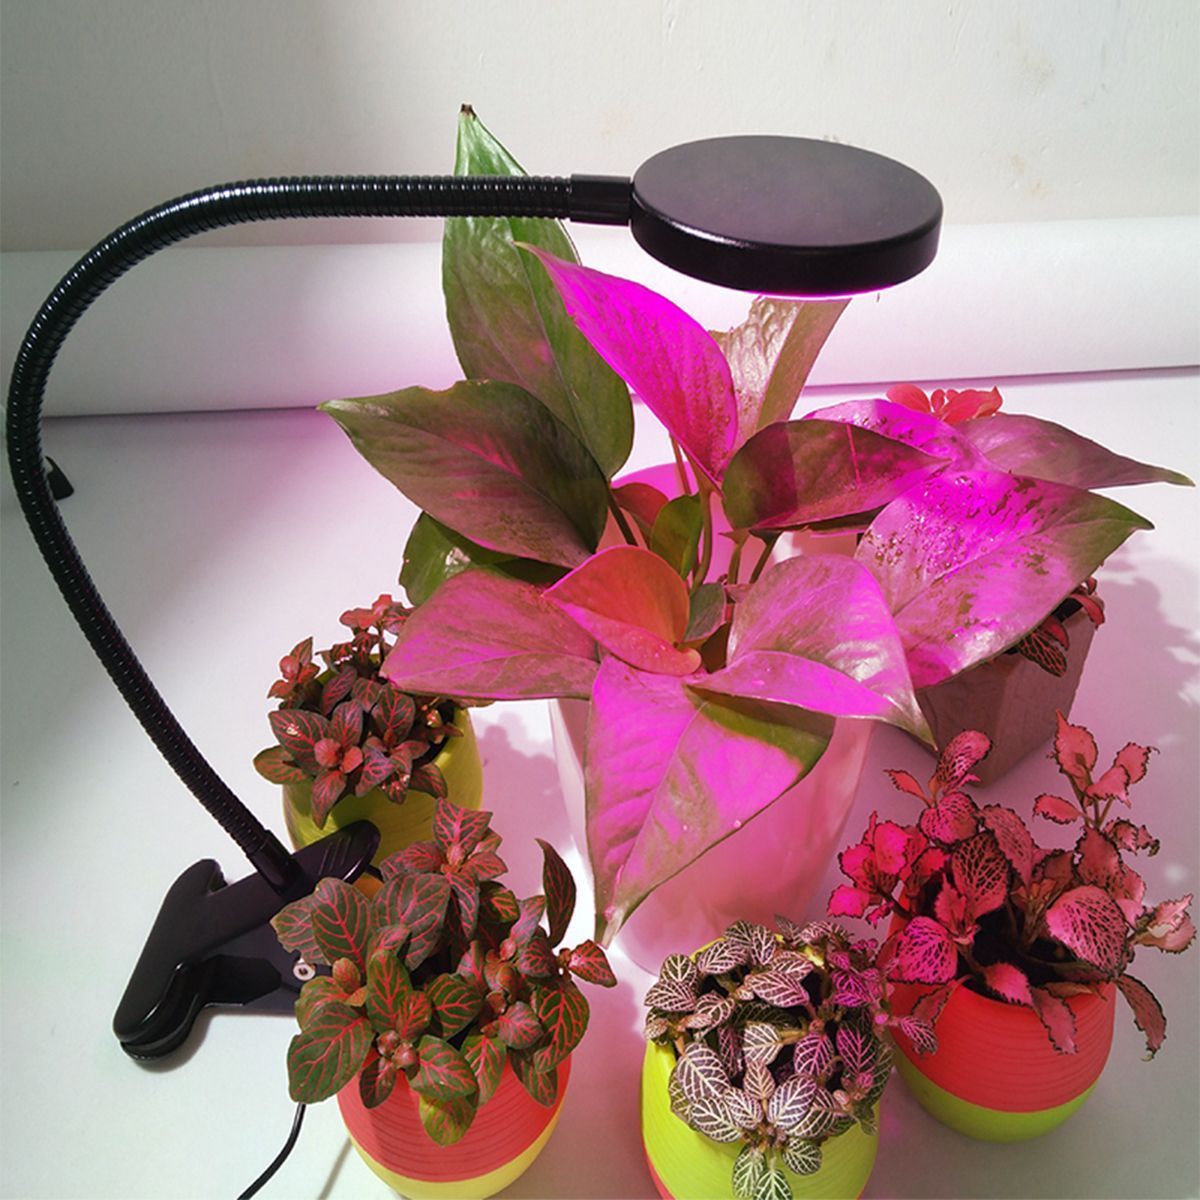 Clip-Plant-Fill-Light-LED-Grow-Light-Fleshy-Planting-Double-Head-Timing-With-Clips-Like-Sun-1388863